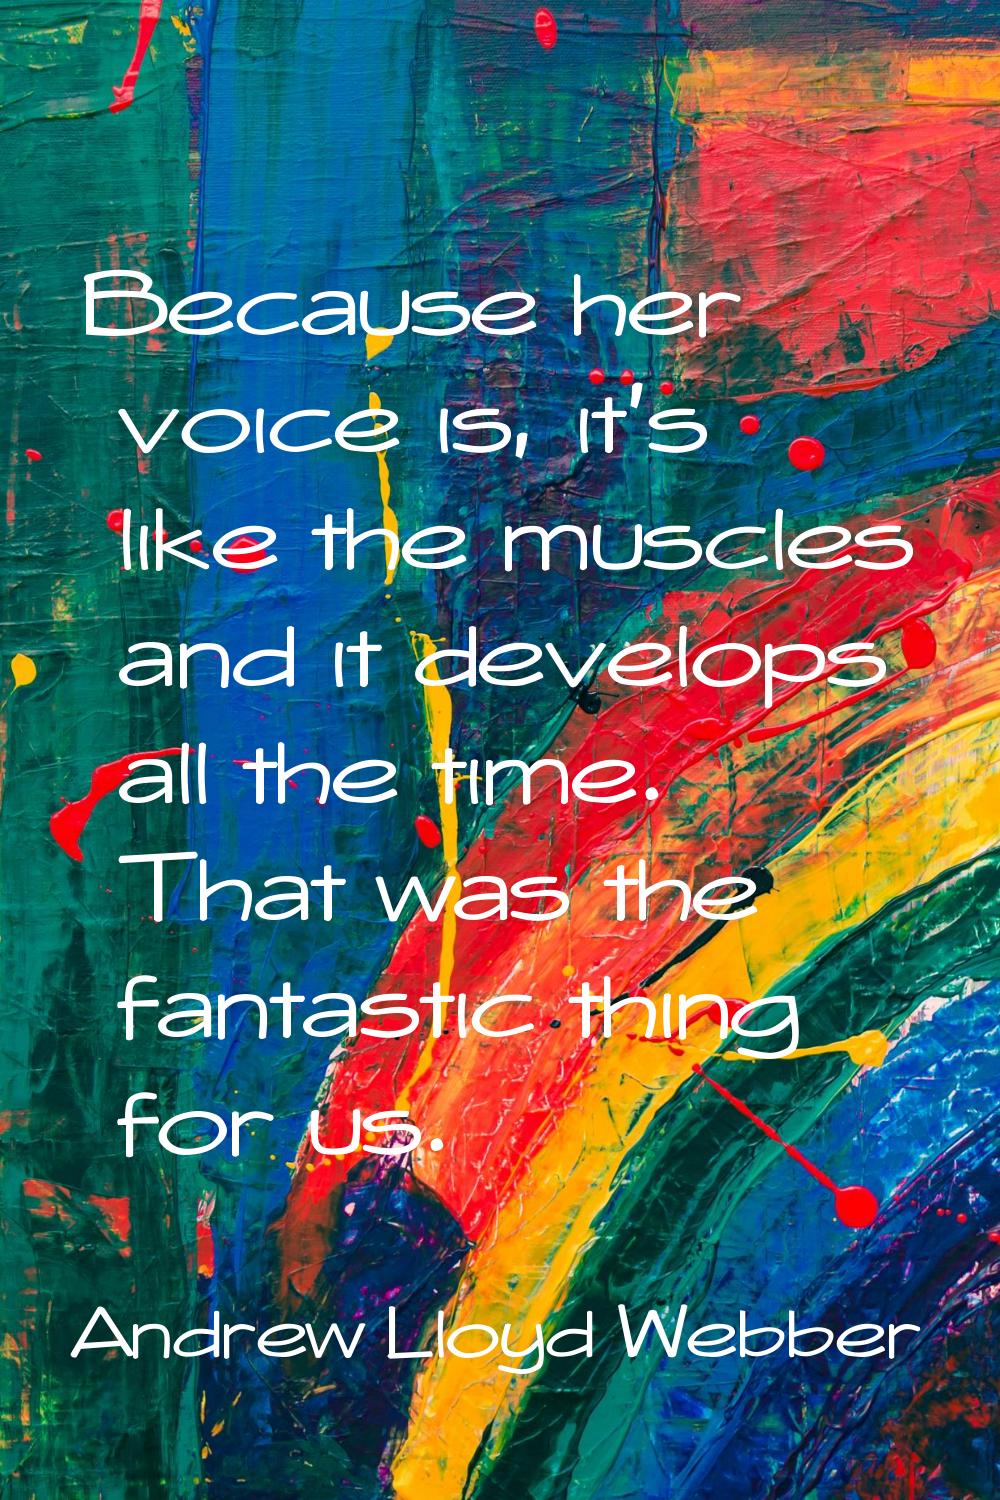 Because her voice is, it's like the muscles and it develops all the time. That was the fantastic th